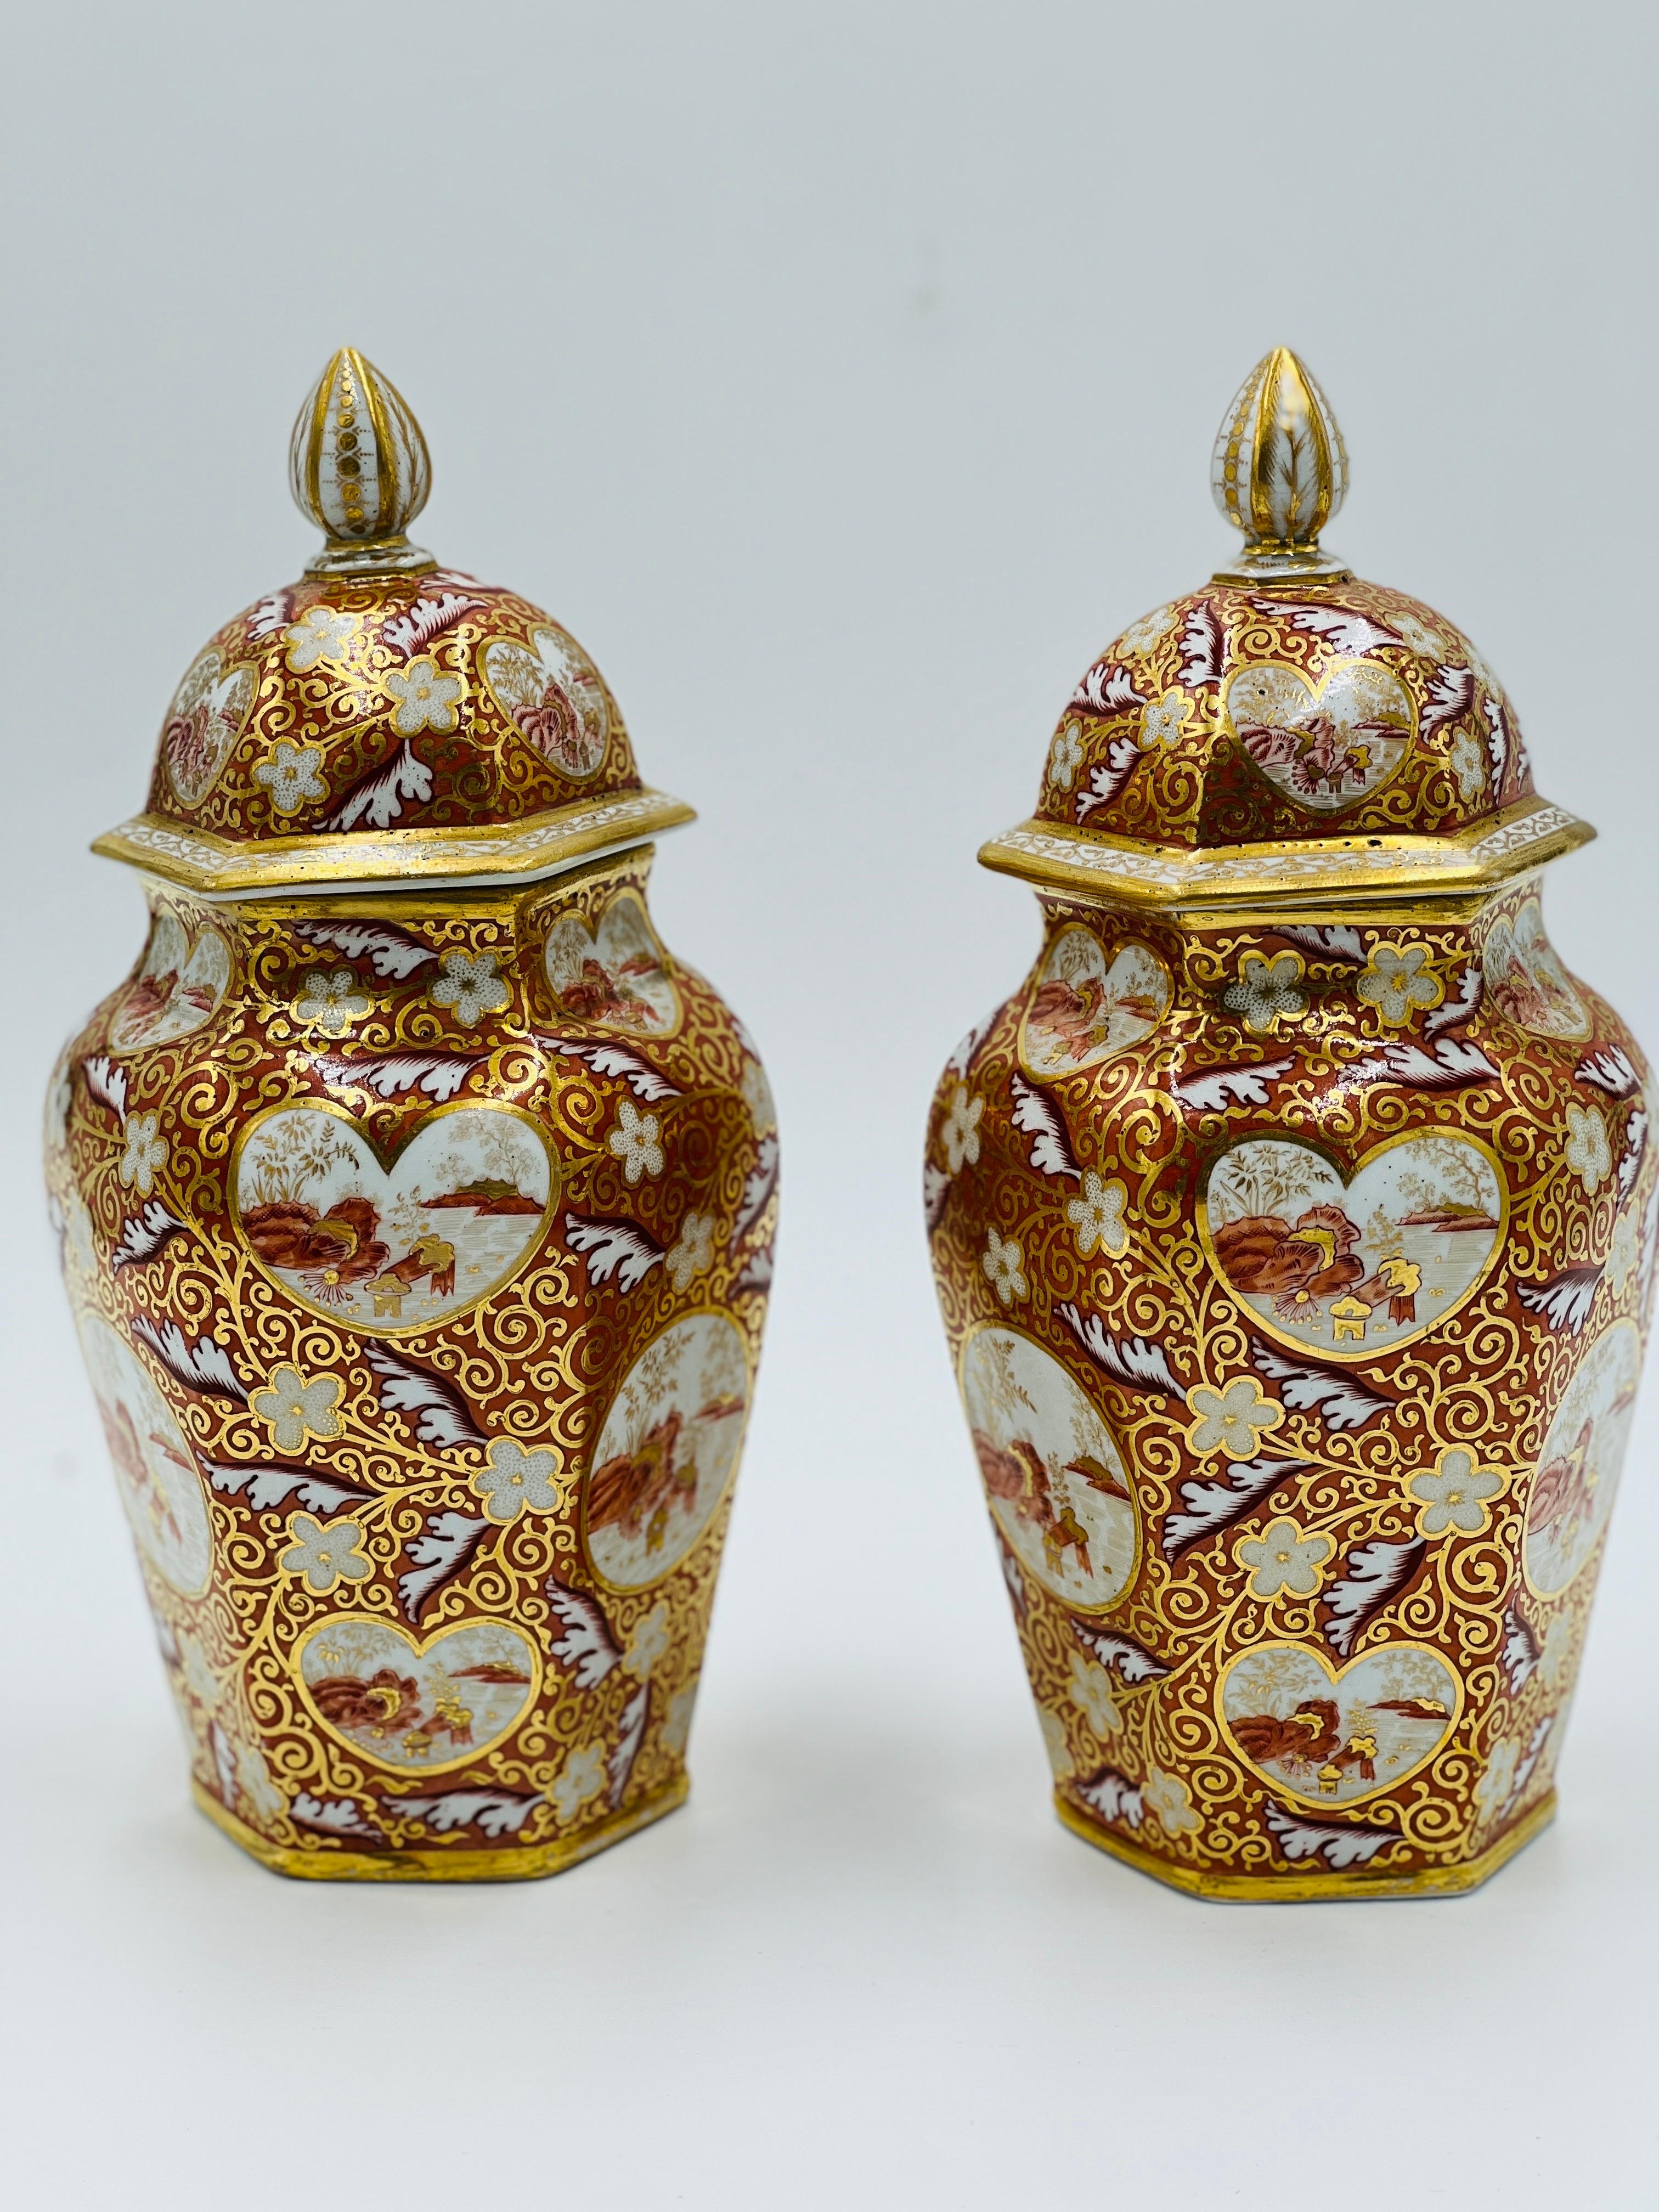 Pair, 19th Century English Japonesque Porcelain Lidded Urns Exc 10.25” For Sale 2